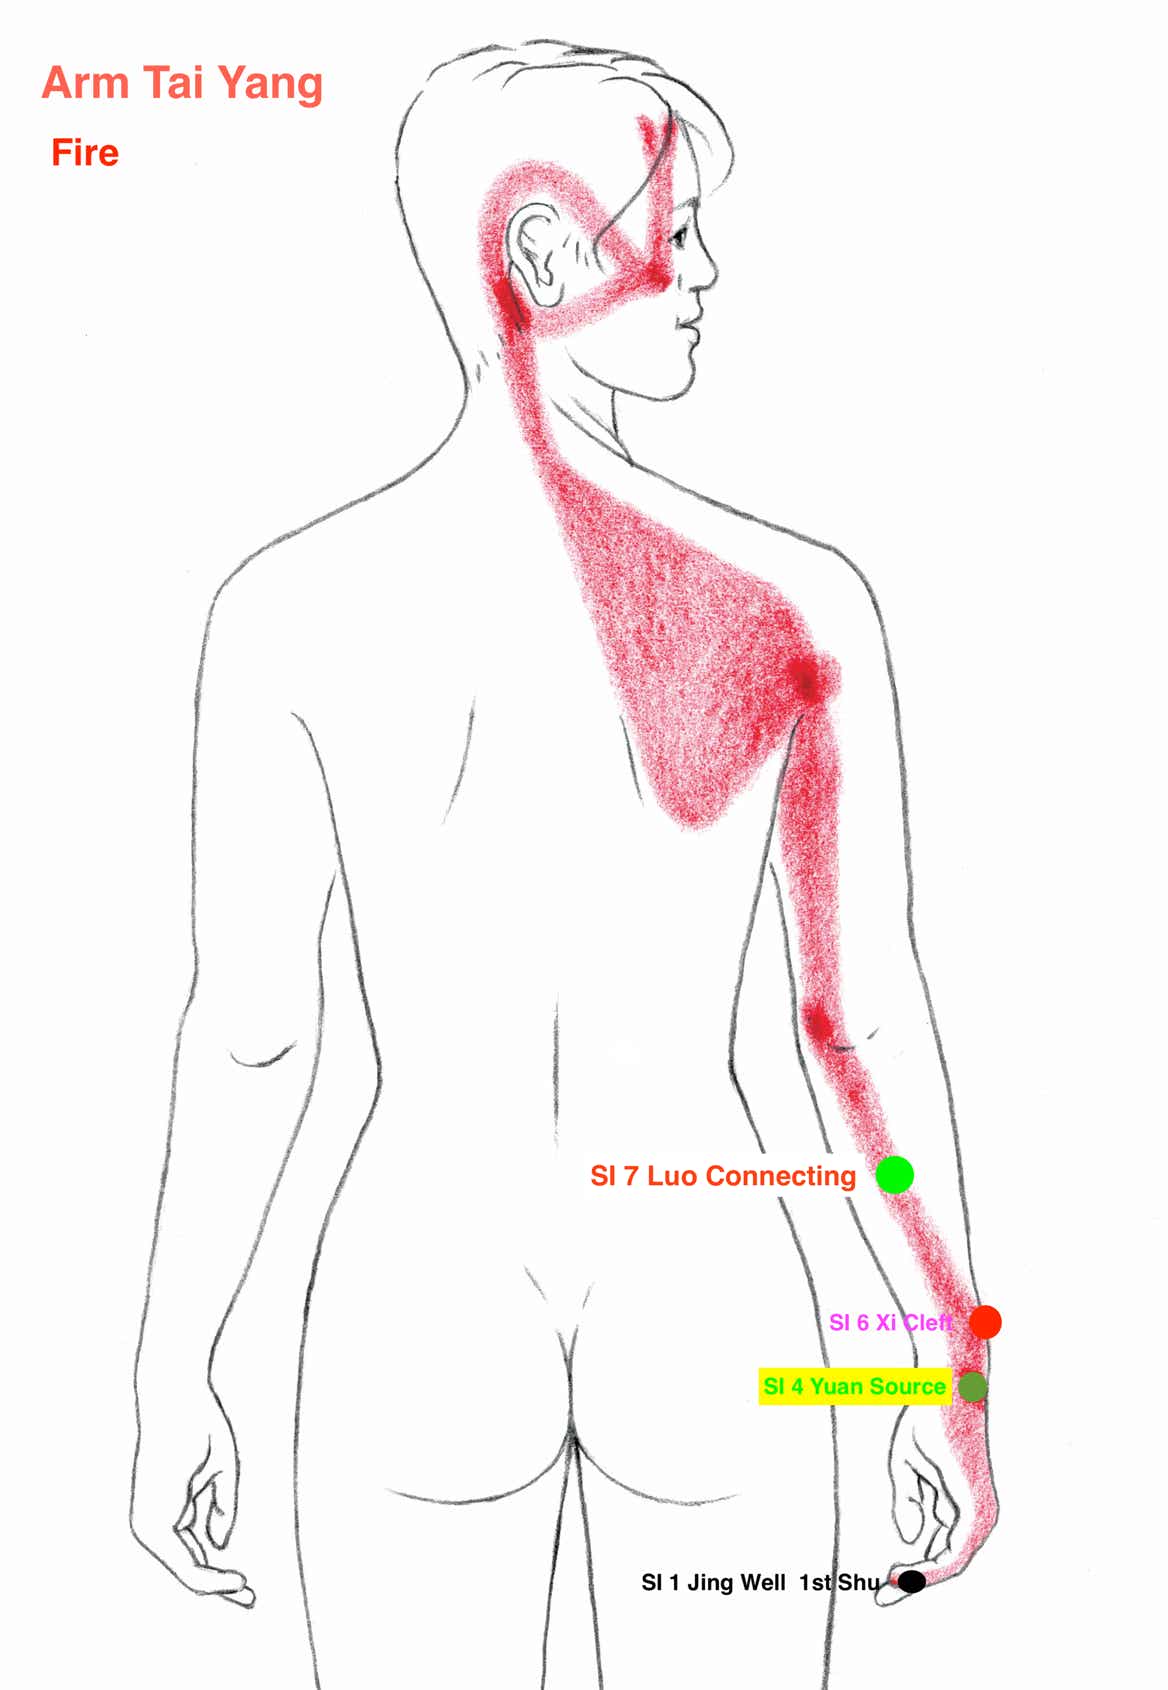 A diagram of the muscles of the rear arm and shoulder